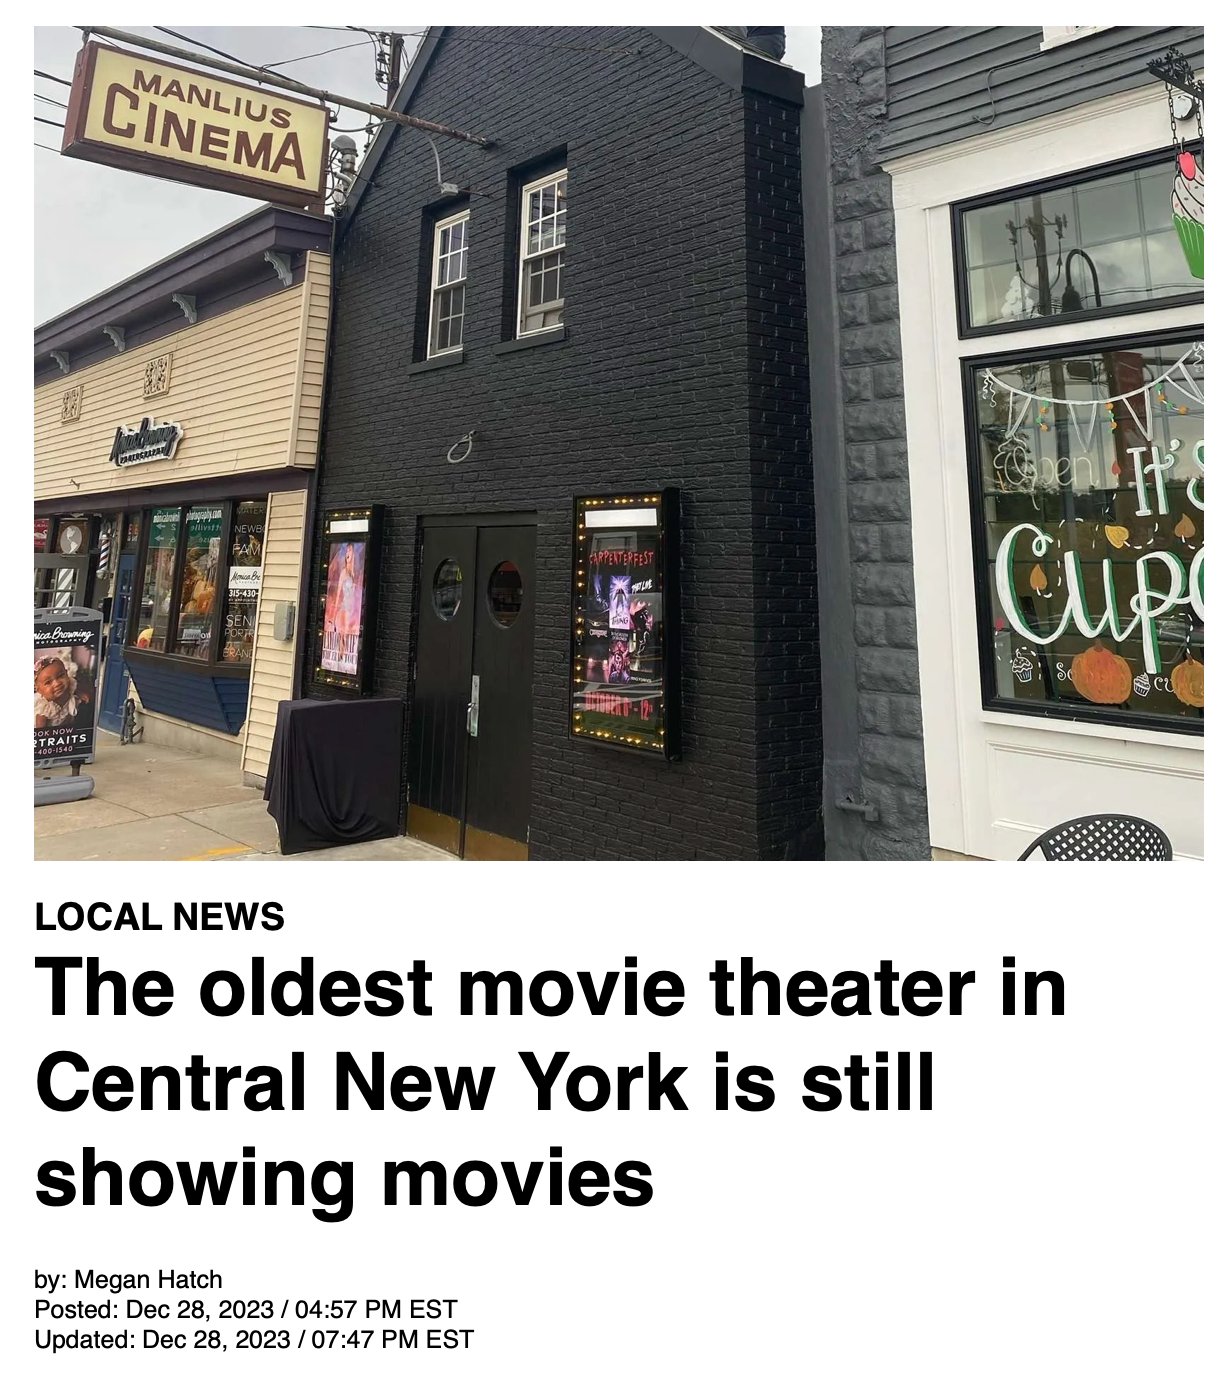 LocalSyr article about the history of the Manlius Cinema